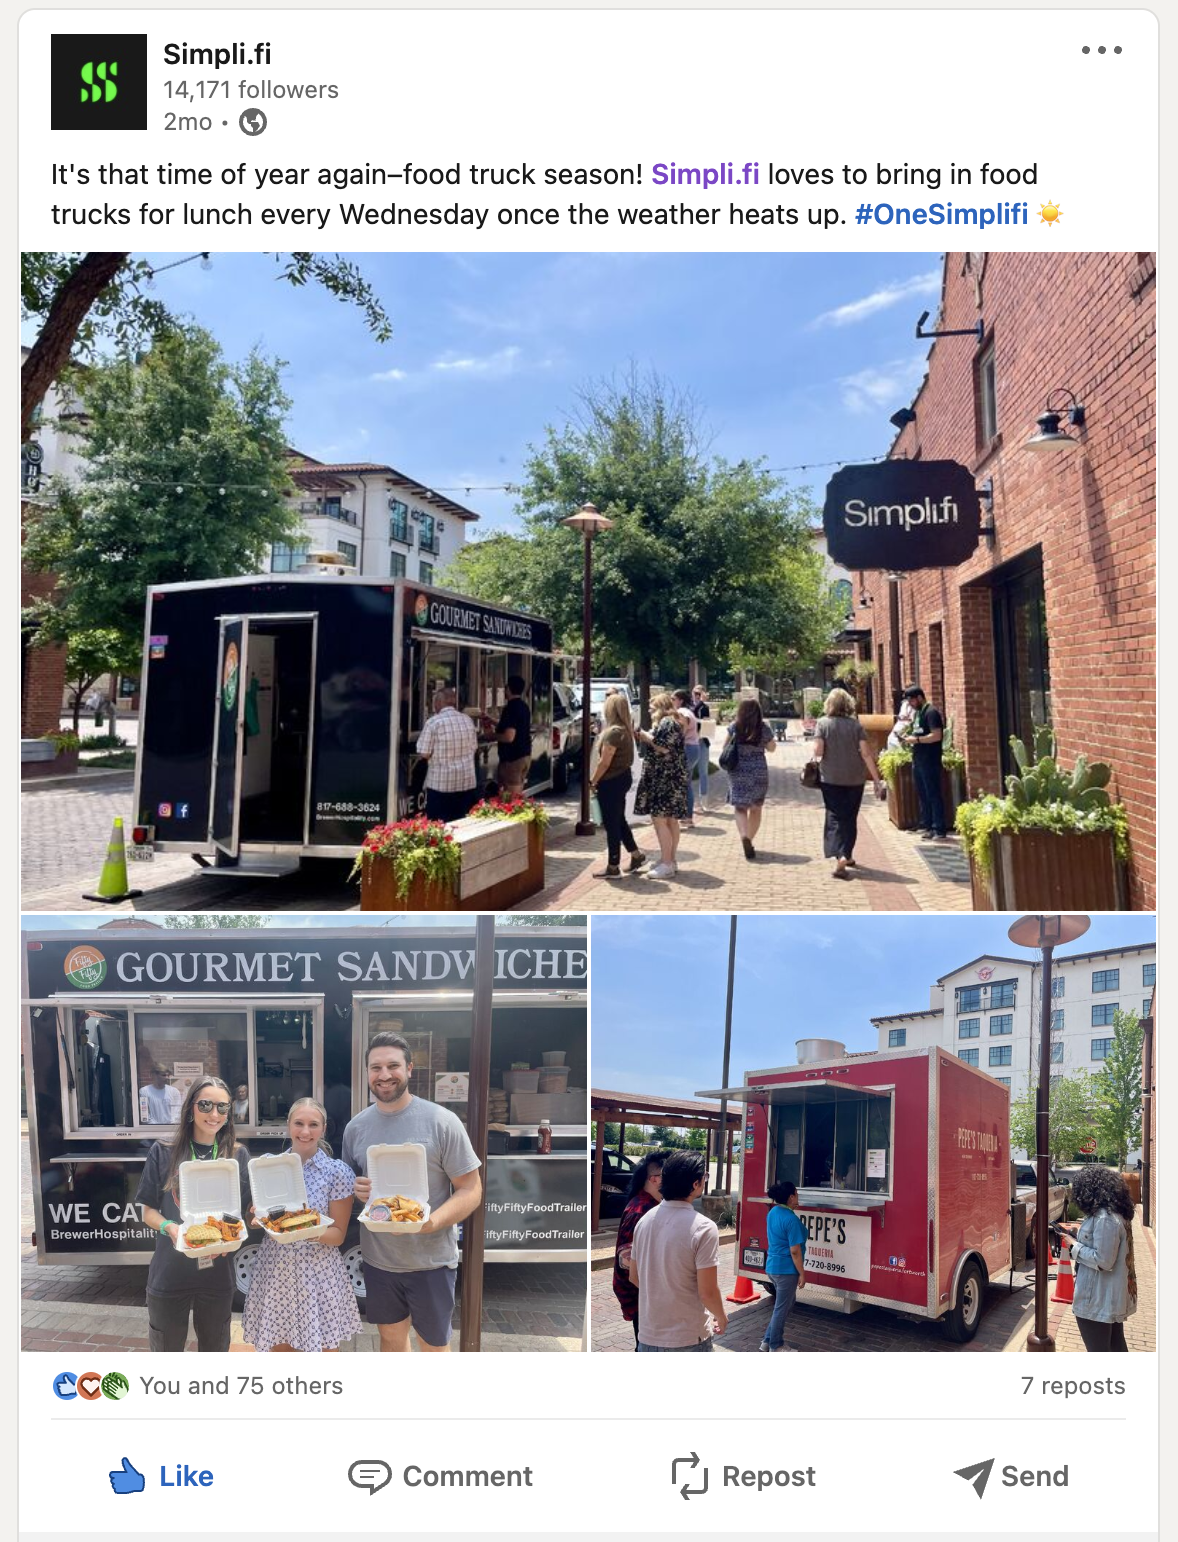 Simpli.fi social post demonstrating company culture. The post reads: It's that time of year again—food truck season! Simpli.fi loves to bring in food trucks every Wednesday once the weather heats up. The post features images of their employees standing in front of food trucks on a warm, sunny day. 